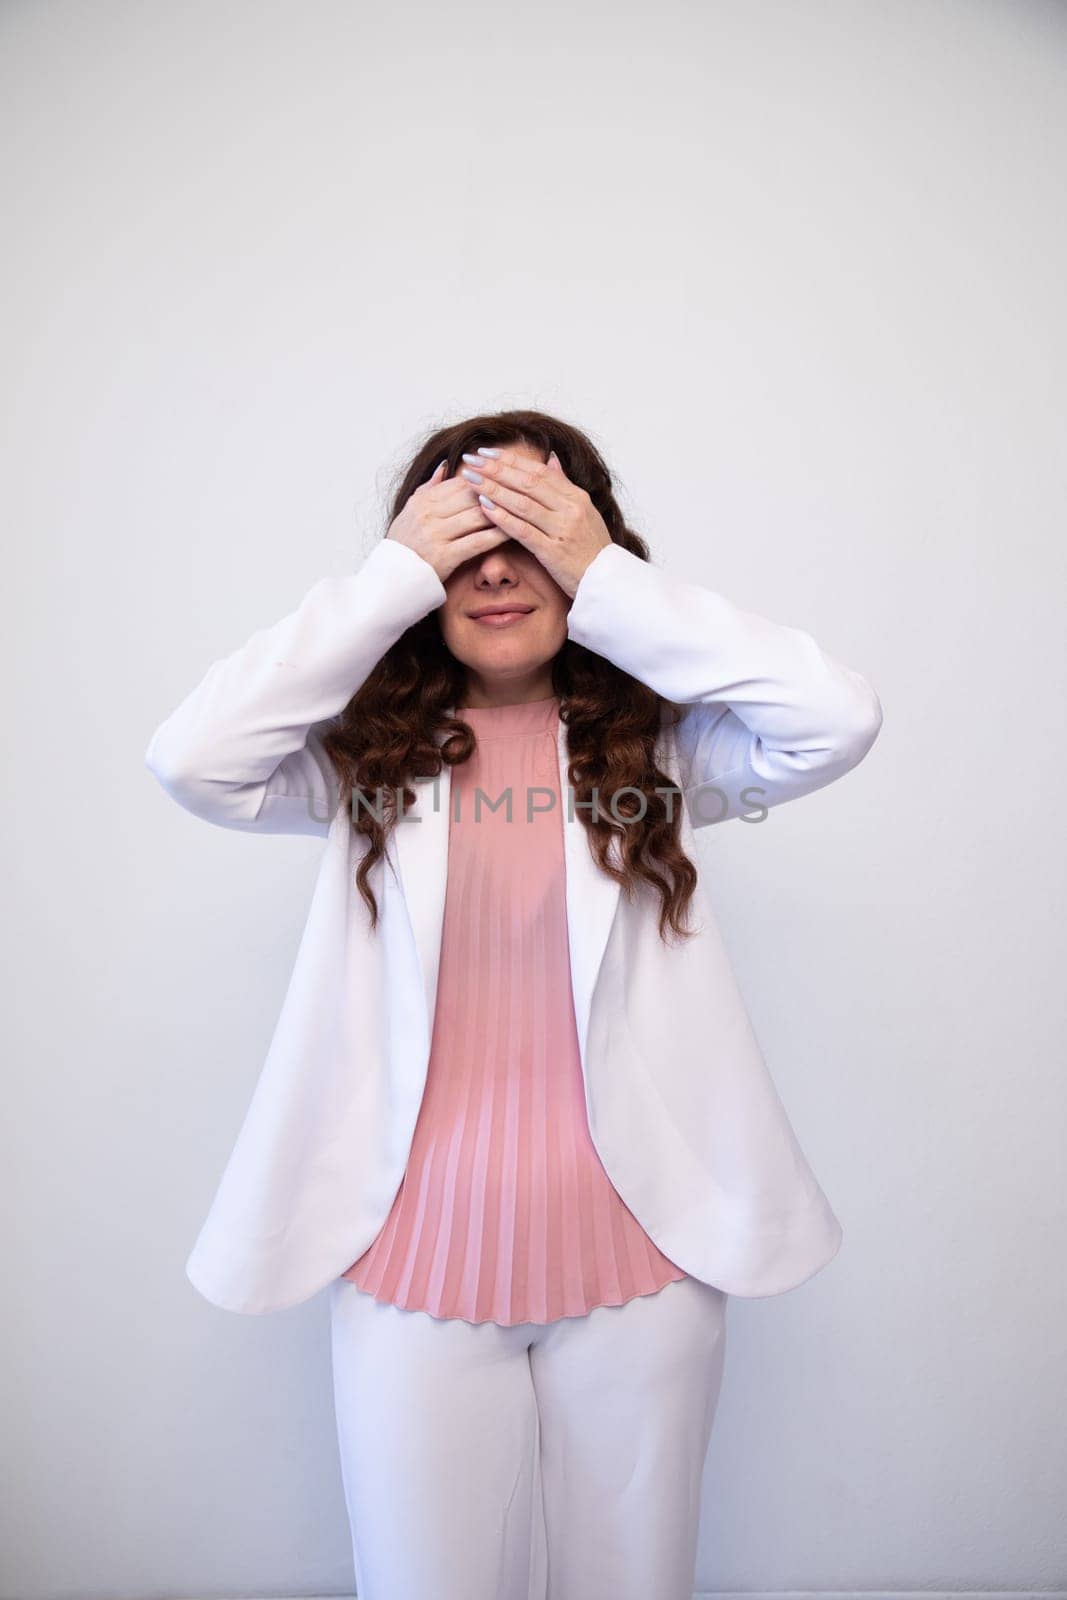 woman in a white suit covered her face with her hands